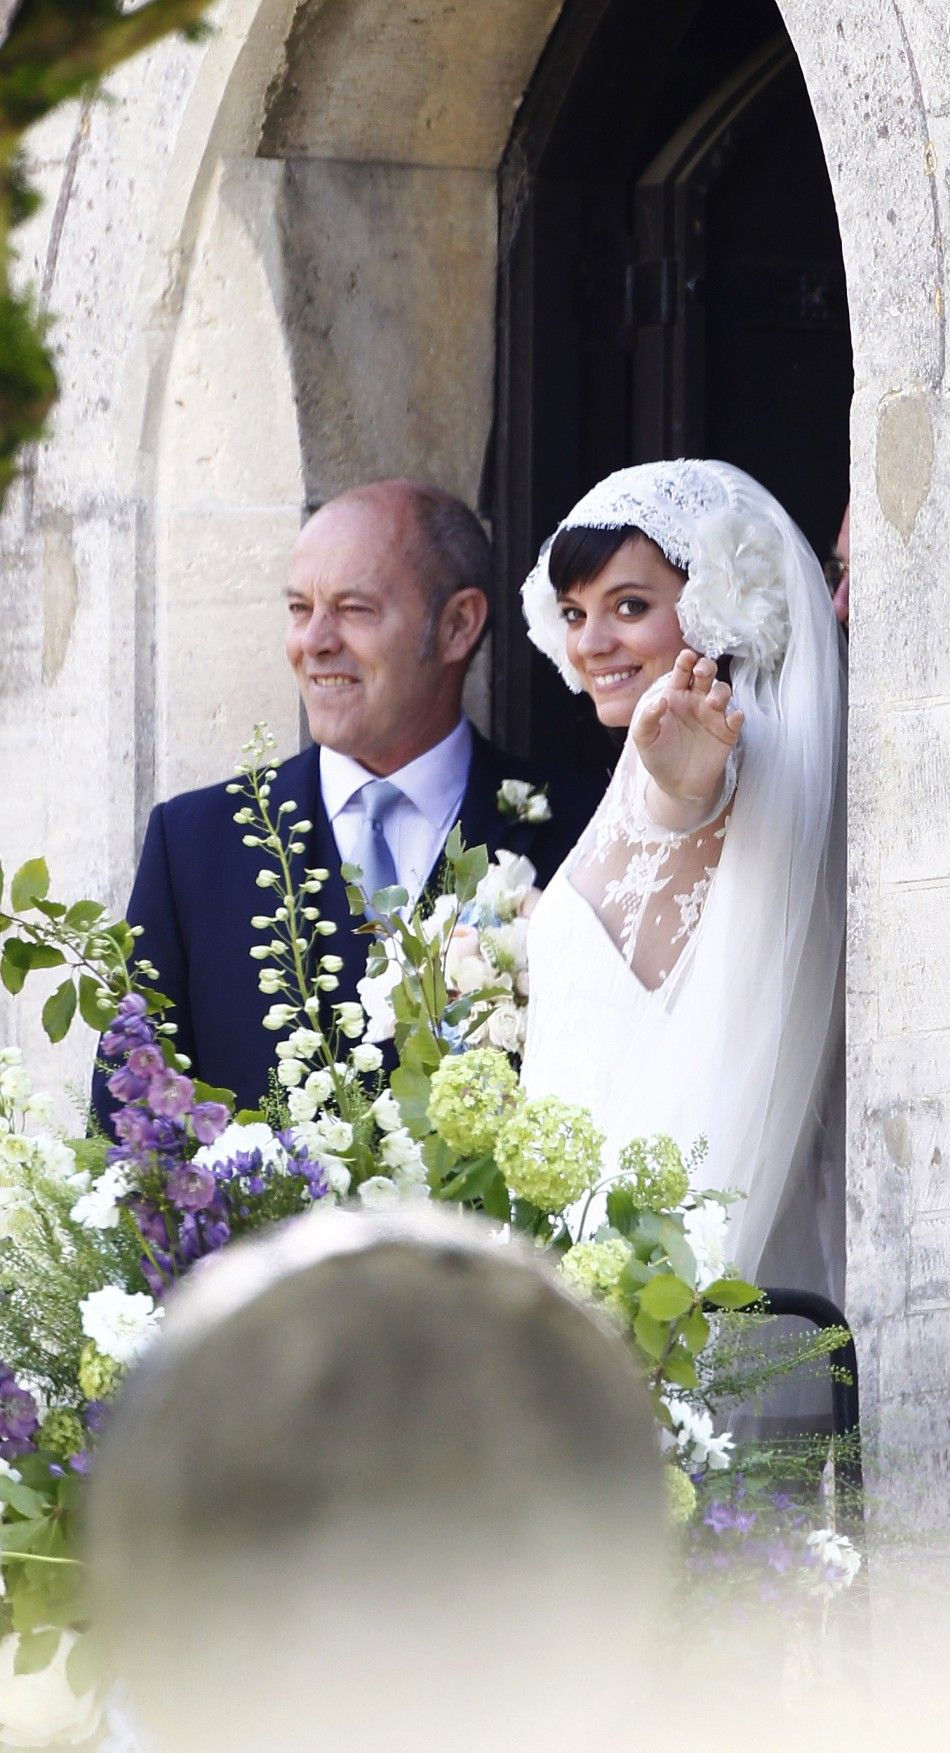 British singer Lily Allen R smiles after marrying Sam Cooper as the couple leaves St James the Great Church in Cranham, Goucestershire, western England, June 11, 2011.